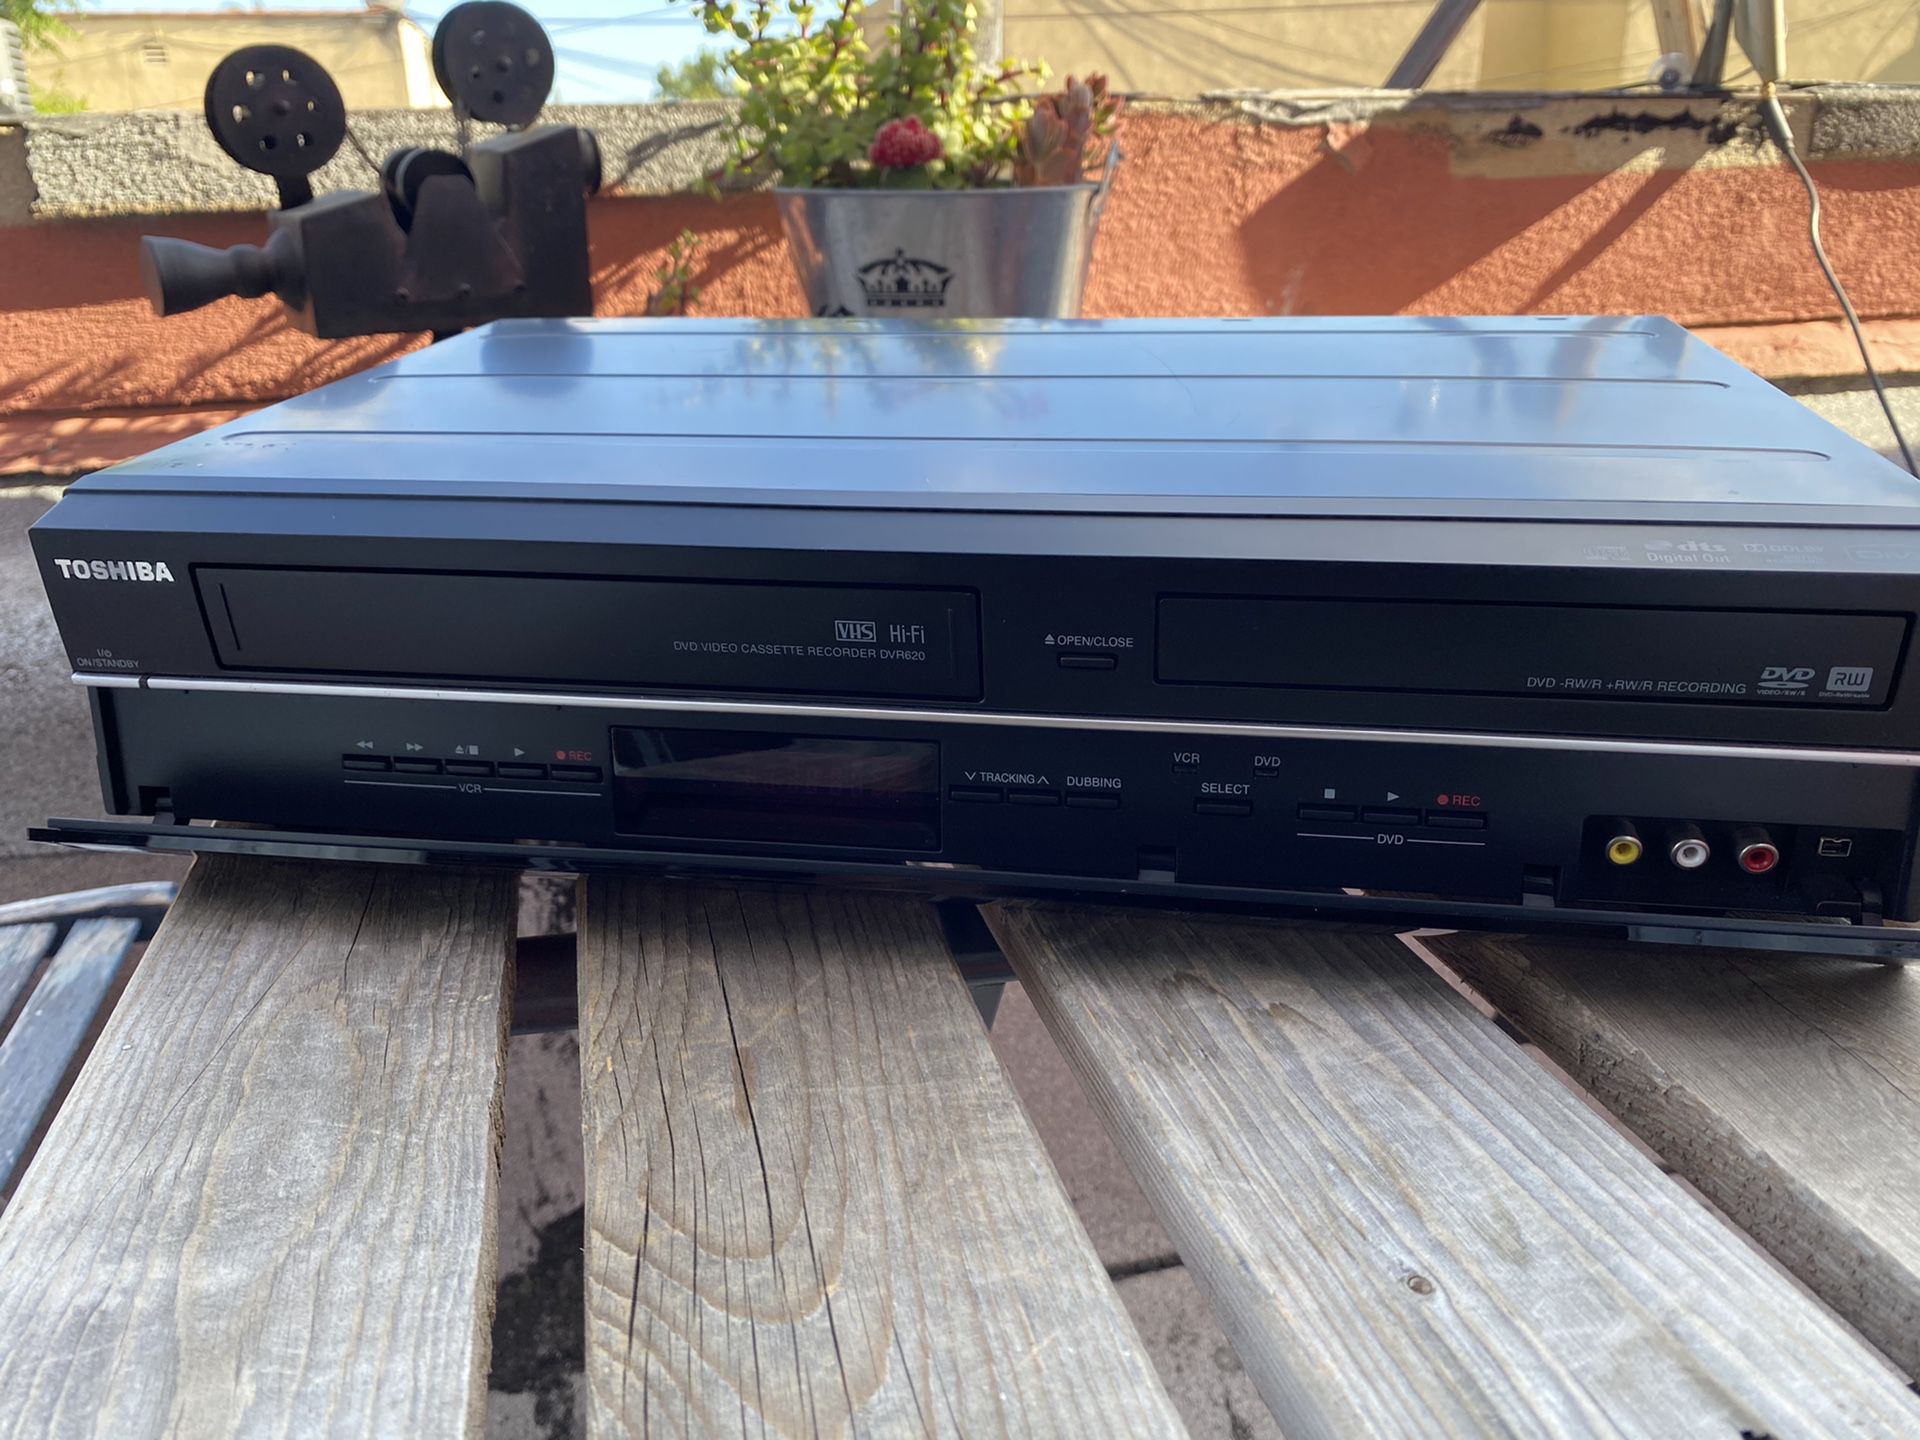 Toshiba dvd/vcr combo with DVD recorder.